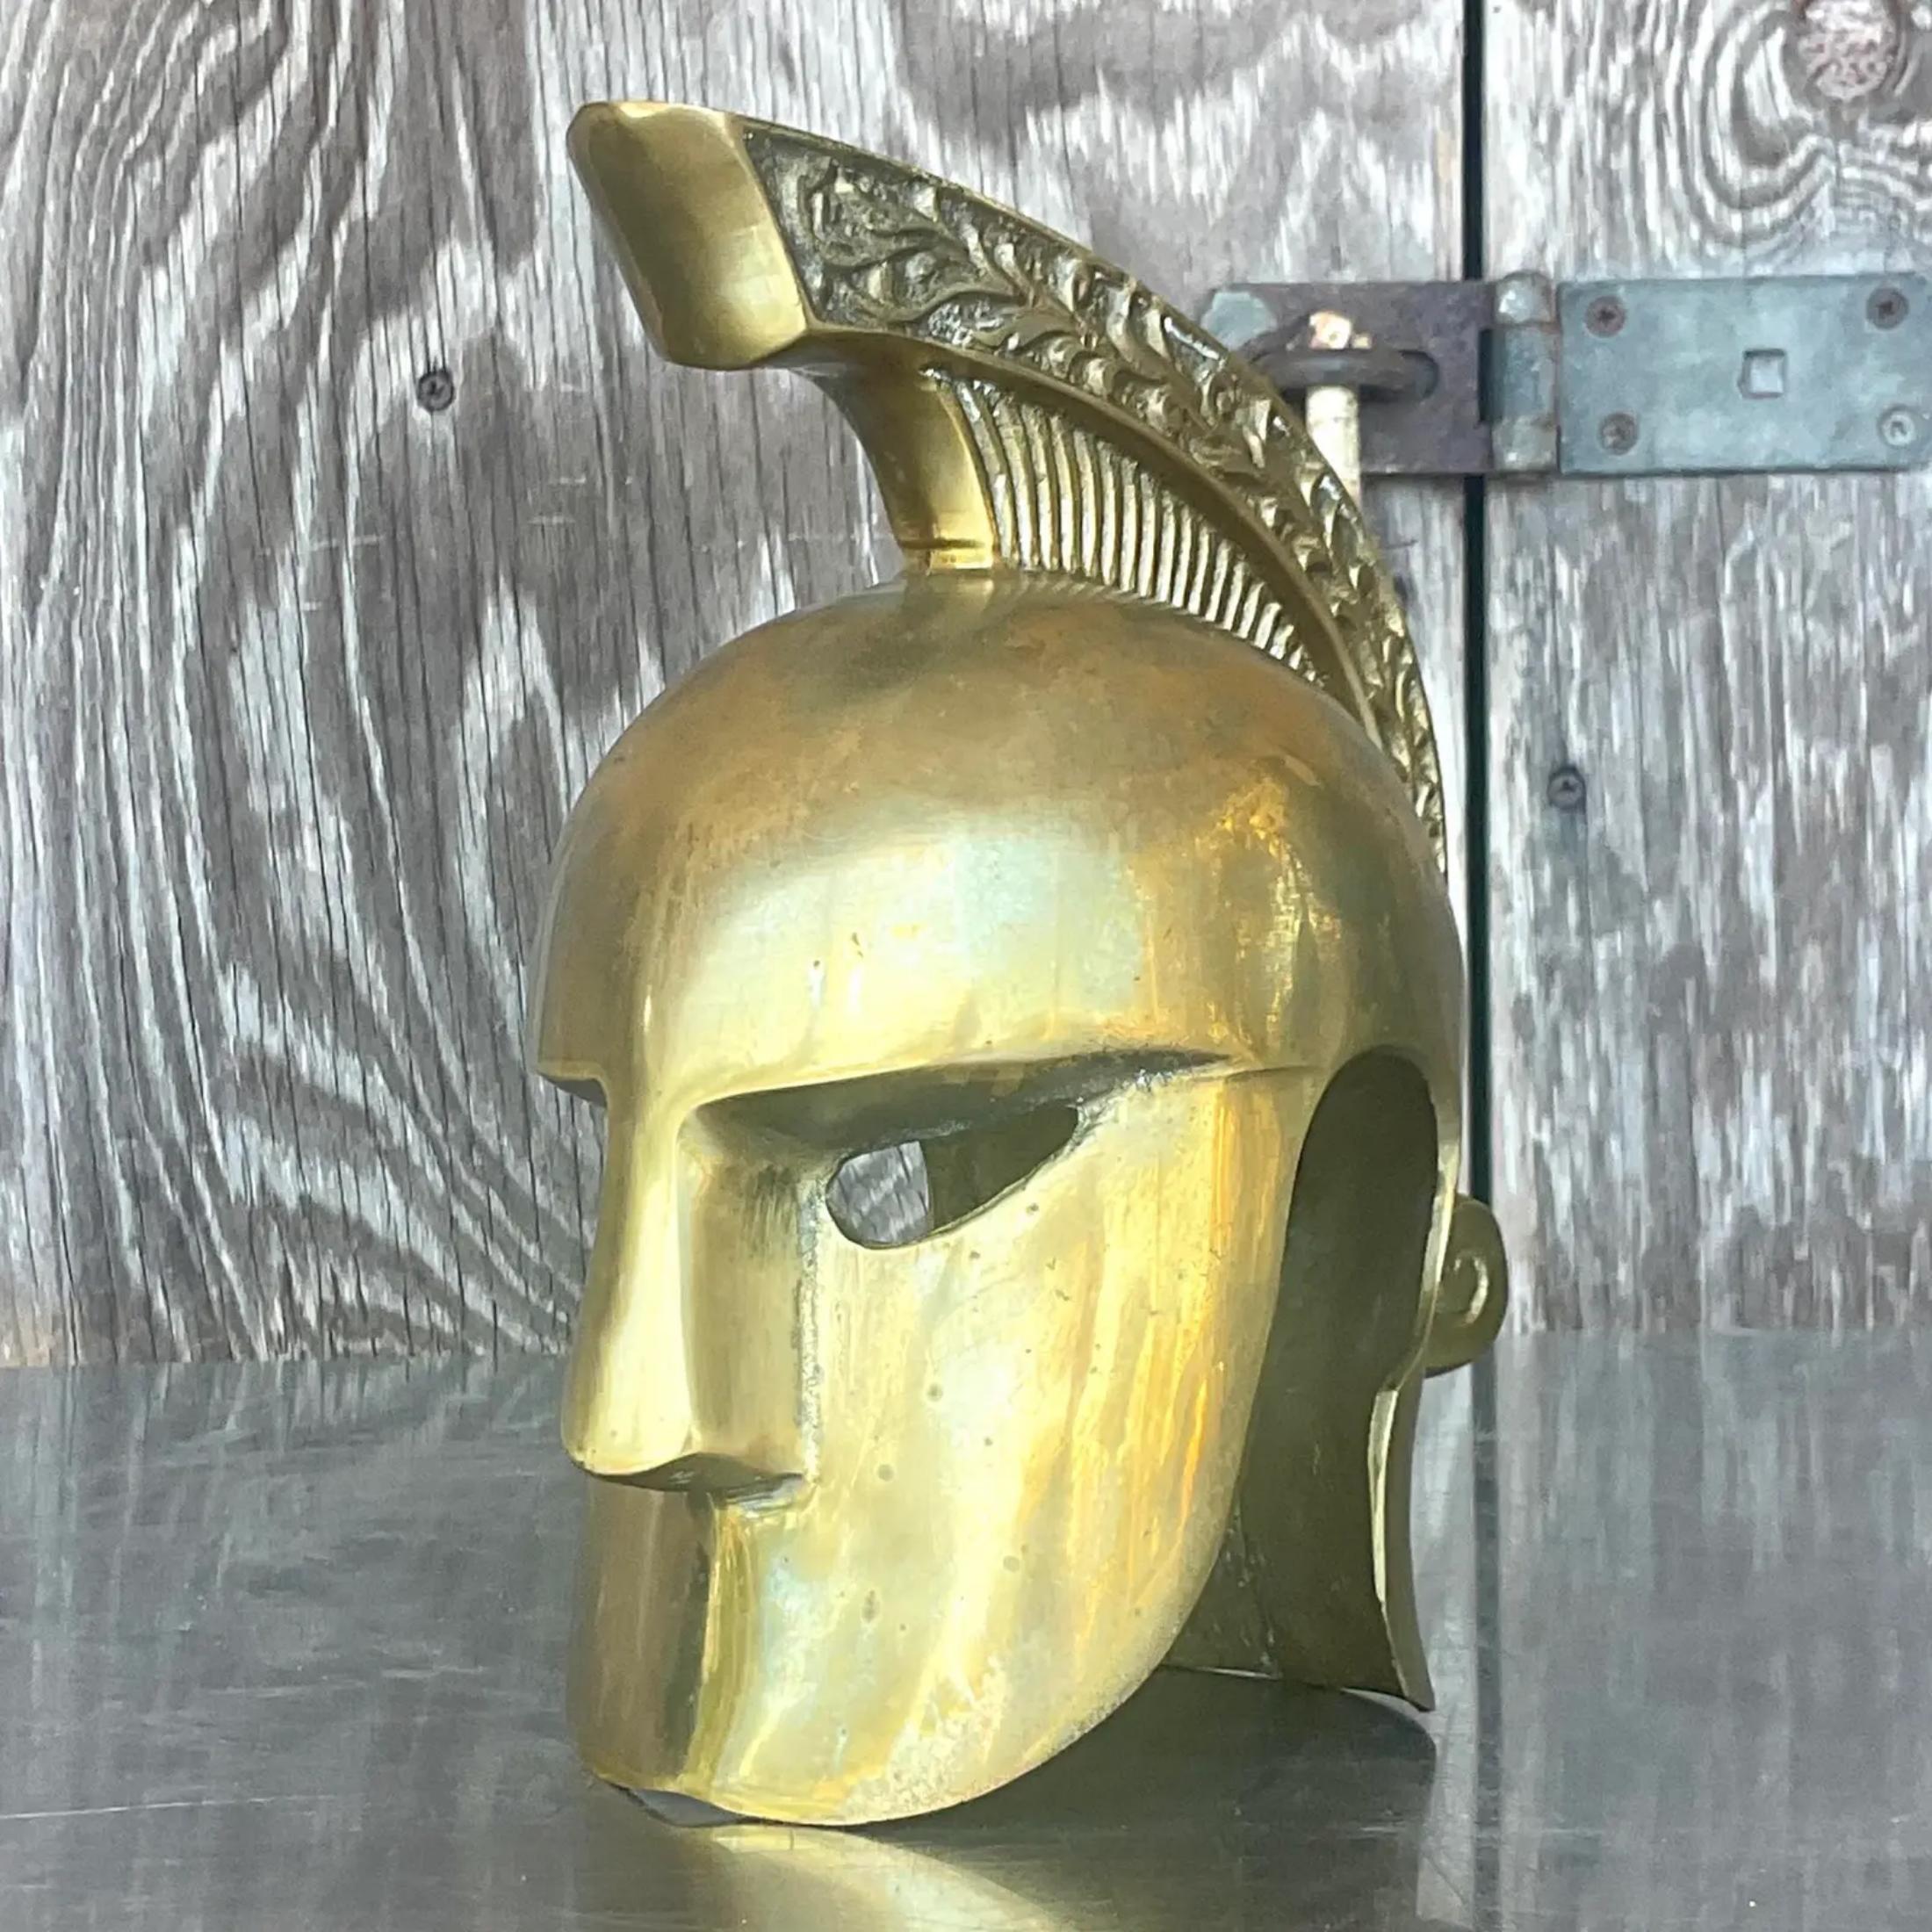 A fabulous vintage Coastal gladiator helmet. A chic little treasure in polished brass. Perfect for your coffee table, etagere or desk. You decide! Acquired from a Palm Beach estate.